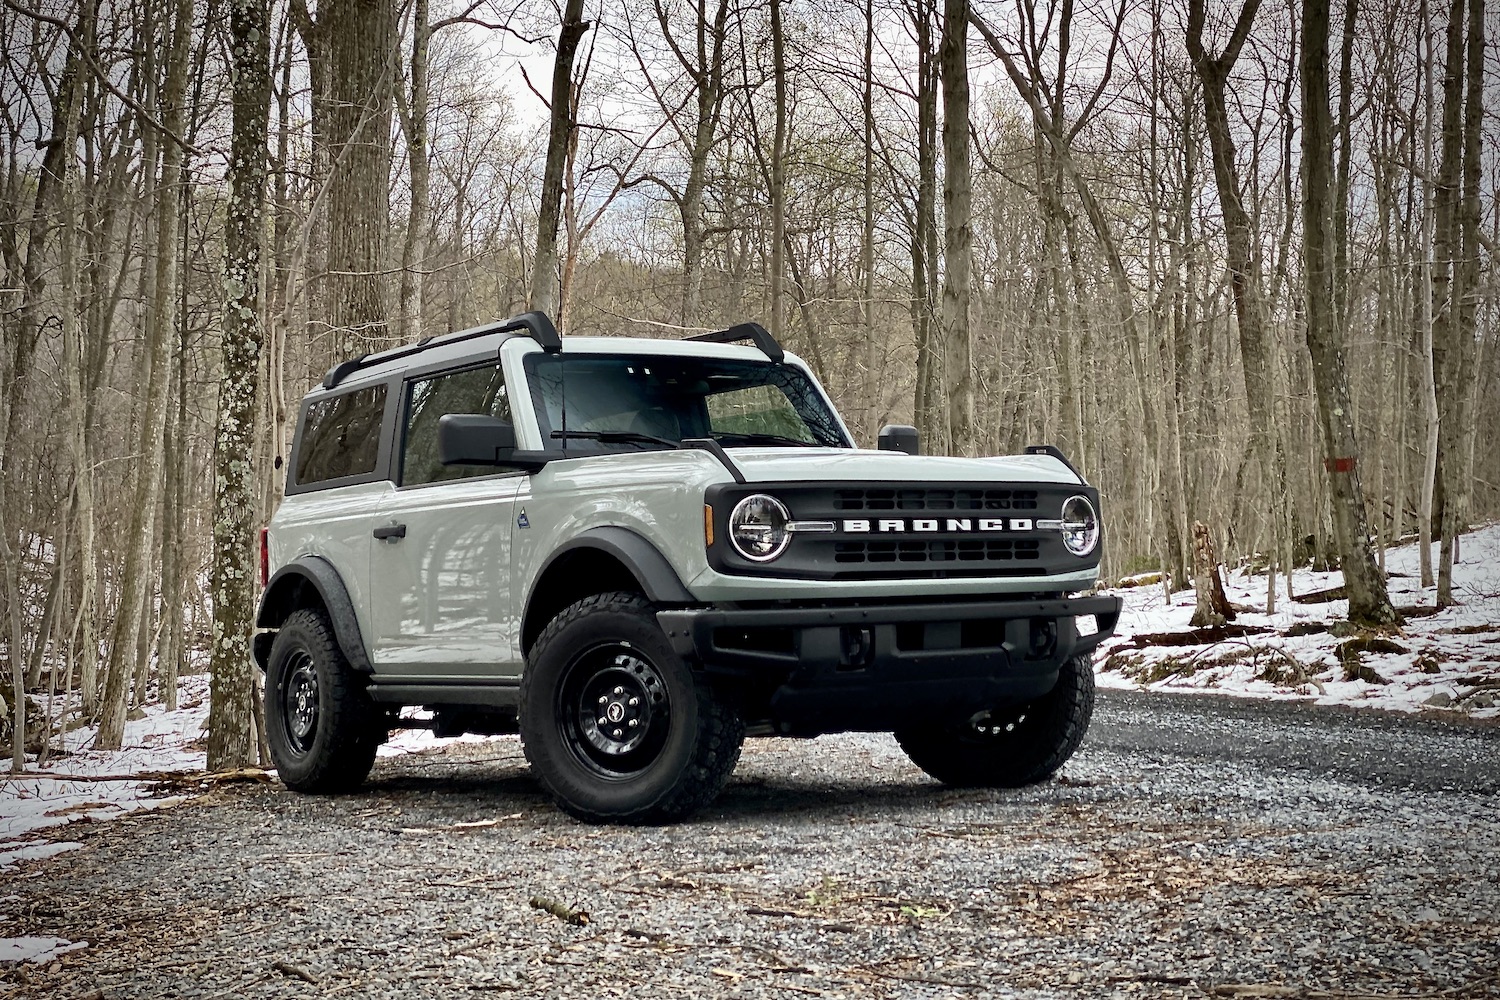 Front end angle of 2021 Ford Bronco on a gravel trail with trees in the back on a snowy cloudy day.